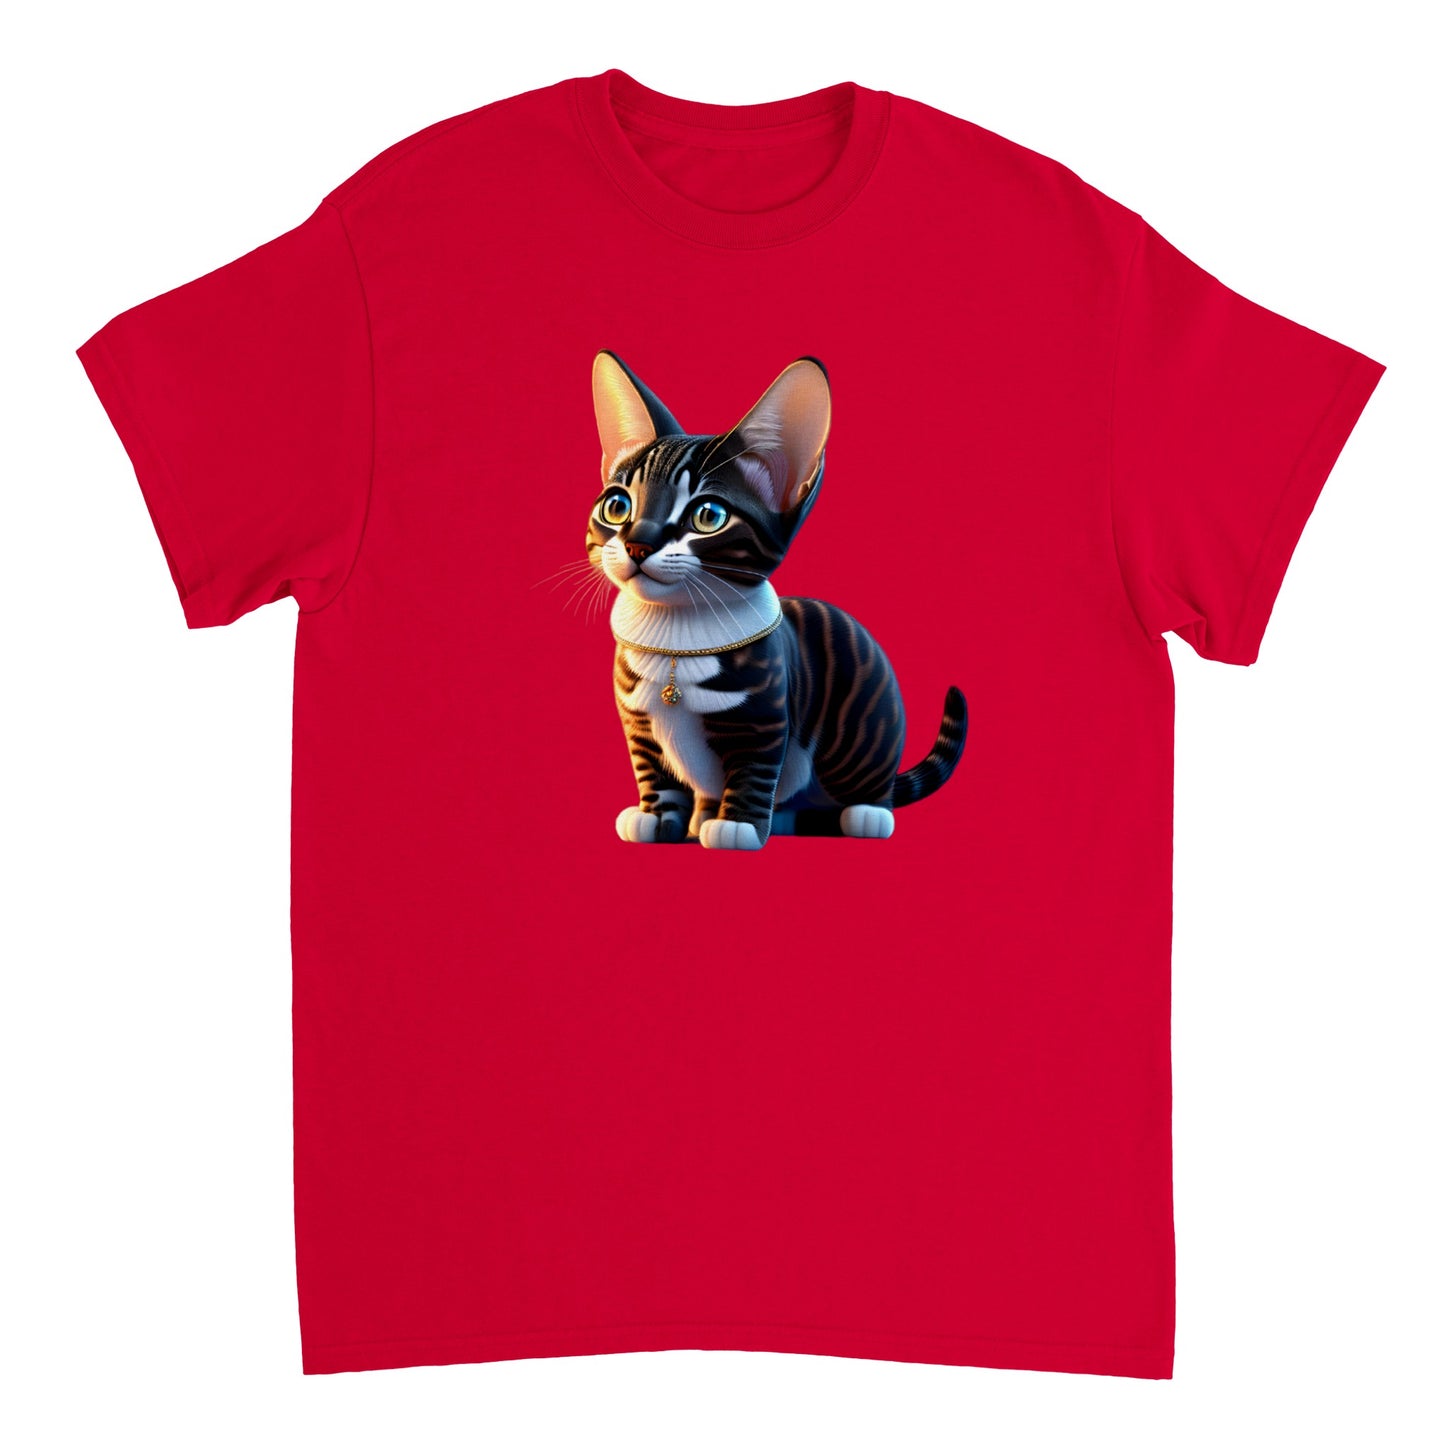 Adorable, Cool, Cute Cats and Kittens Toy - Heavyweight Unisex Crewneck T-shirt 25